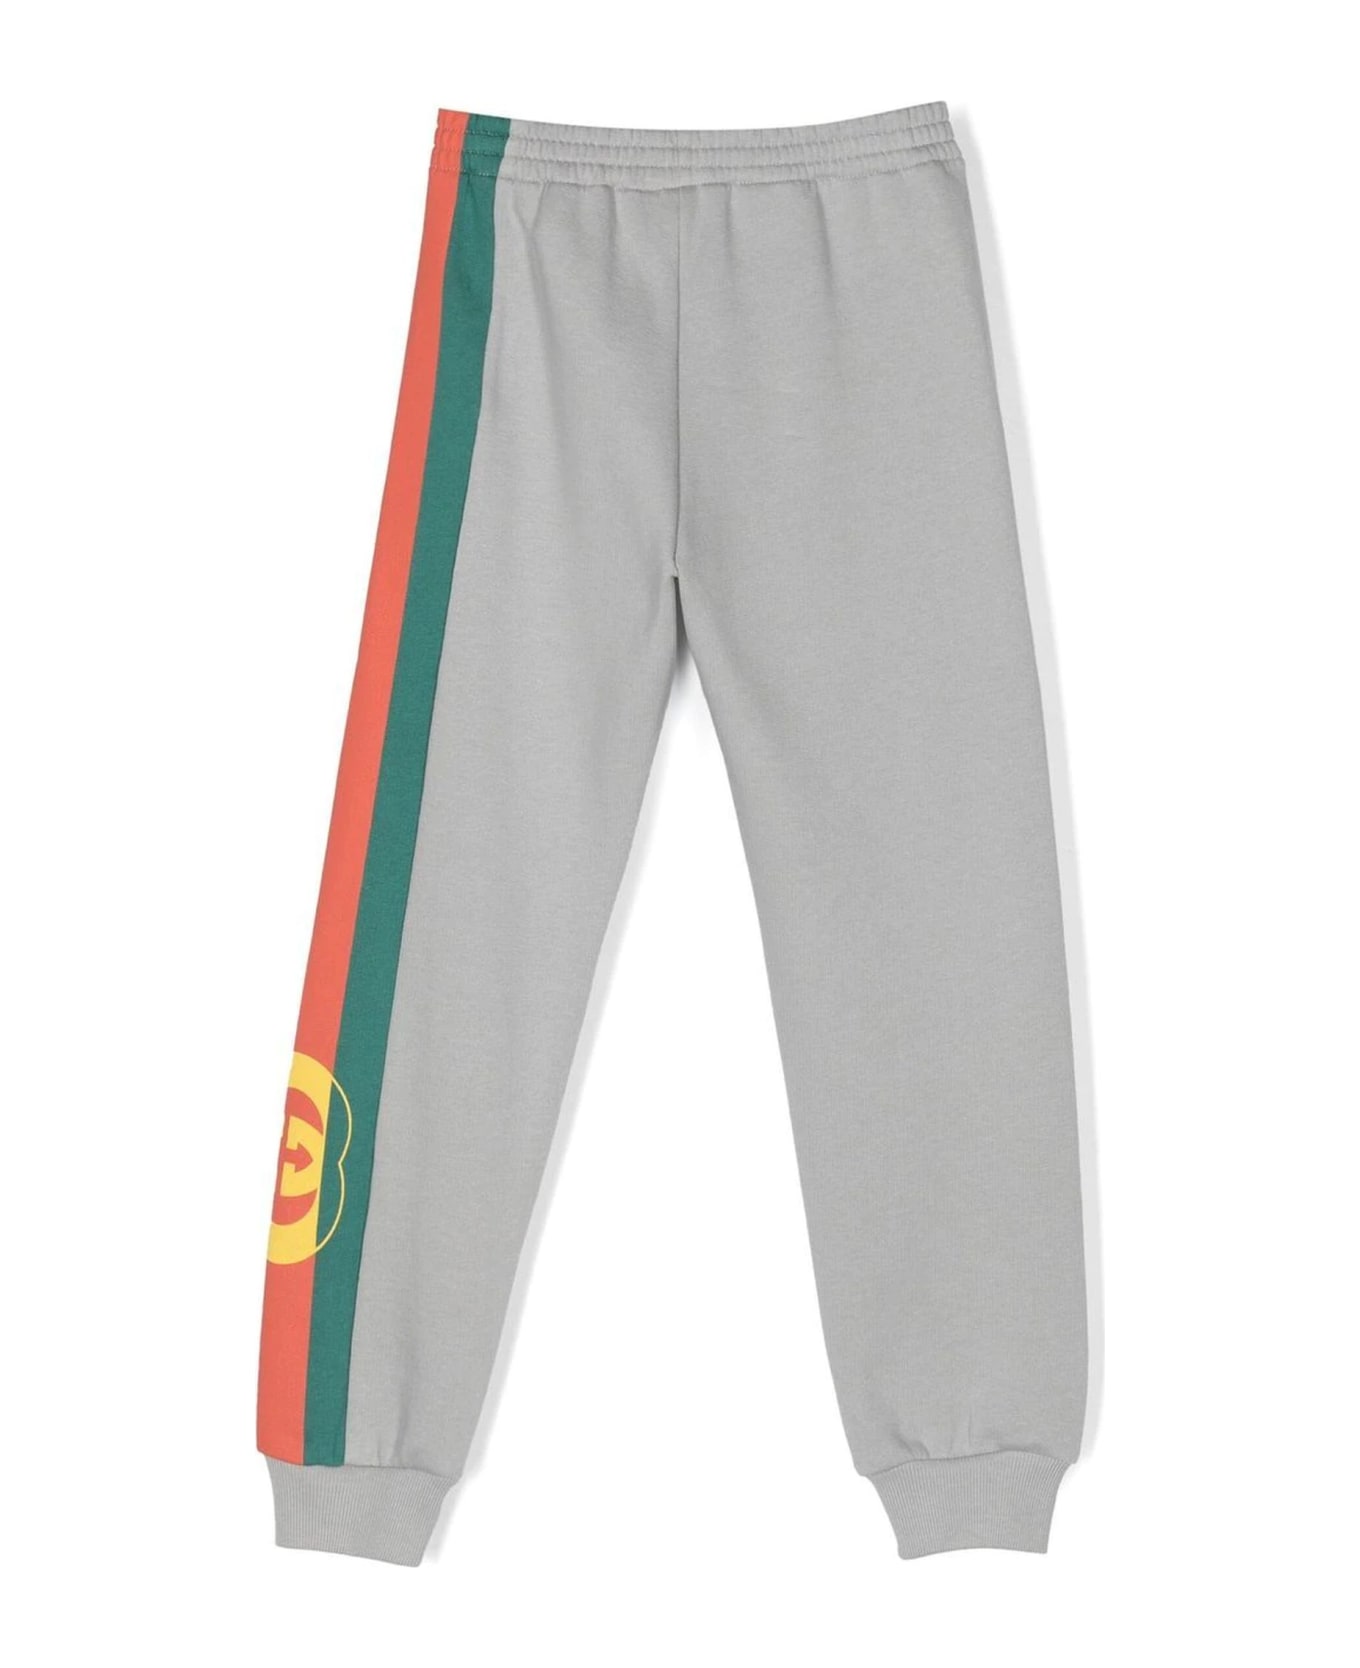 Gucci Grey Cotton Track Pants - Thunderstorm